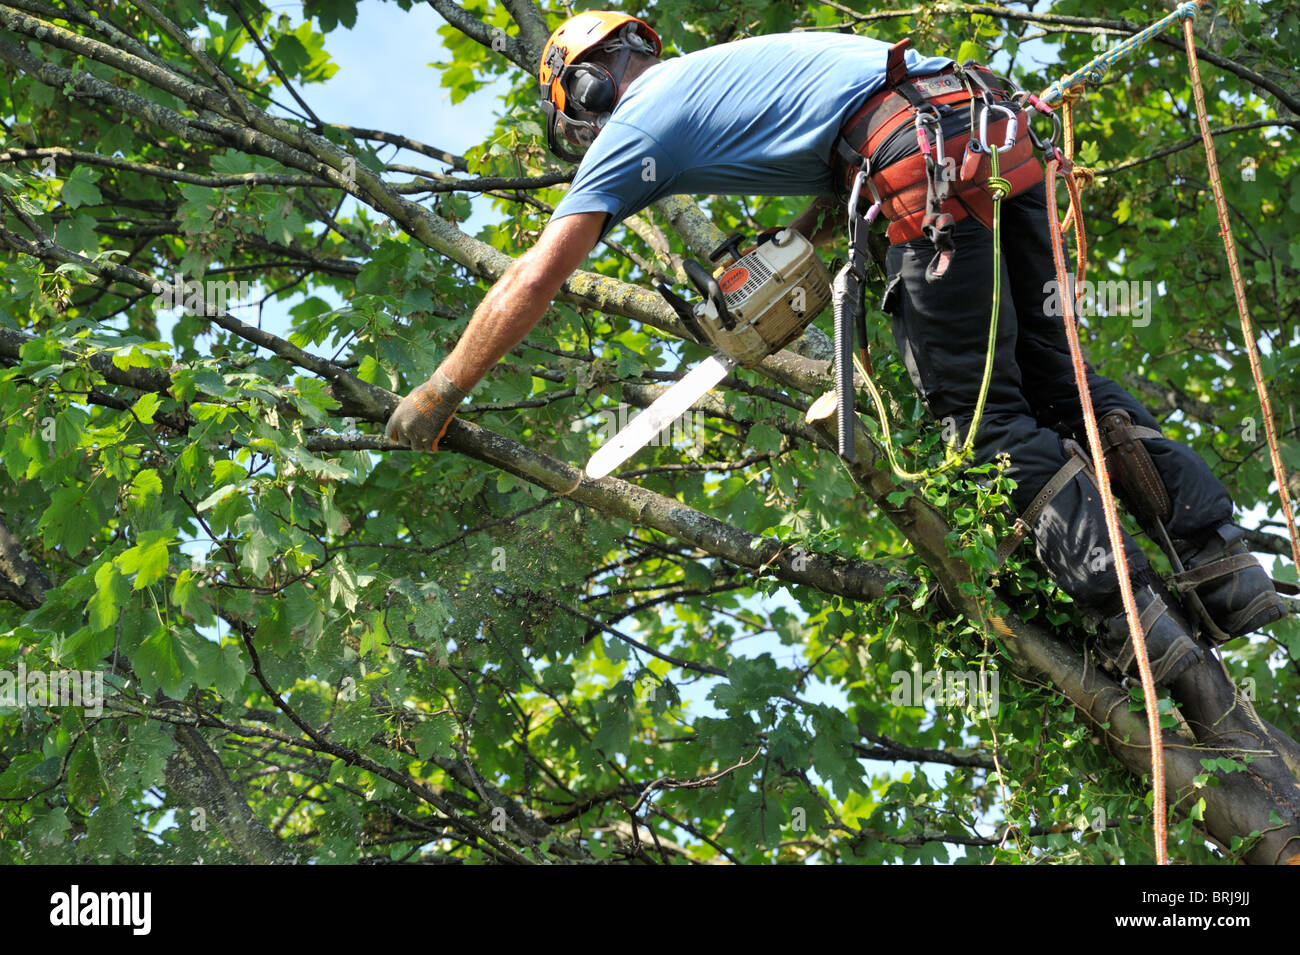 'Tree surgeon' with chainsaw and safety gear in sycamore tree cutting branch Stock Photo